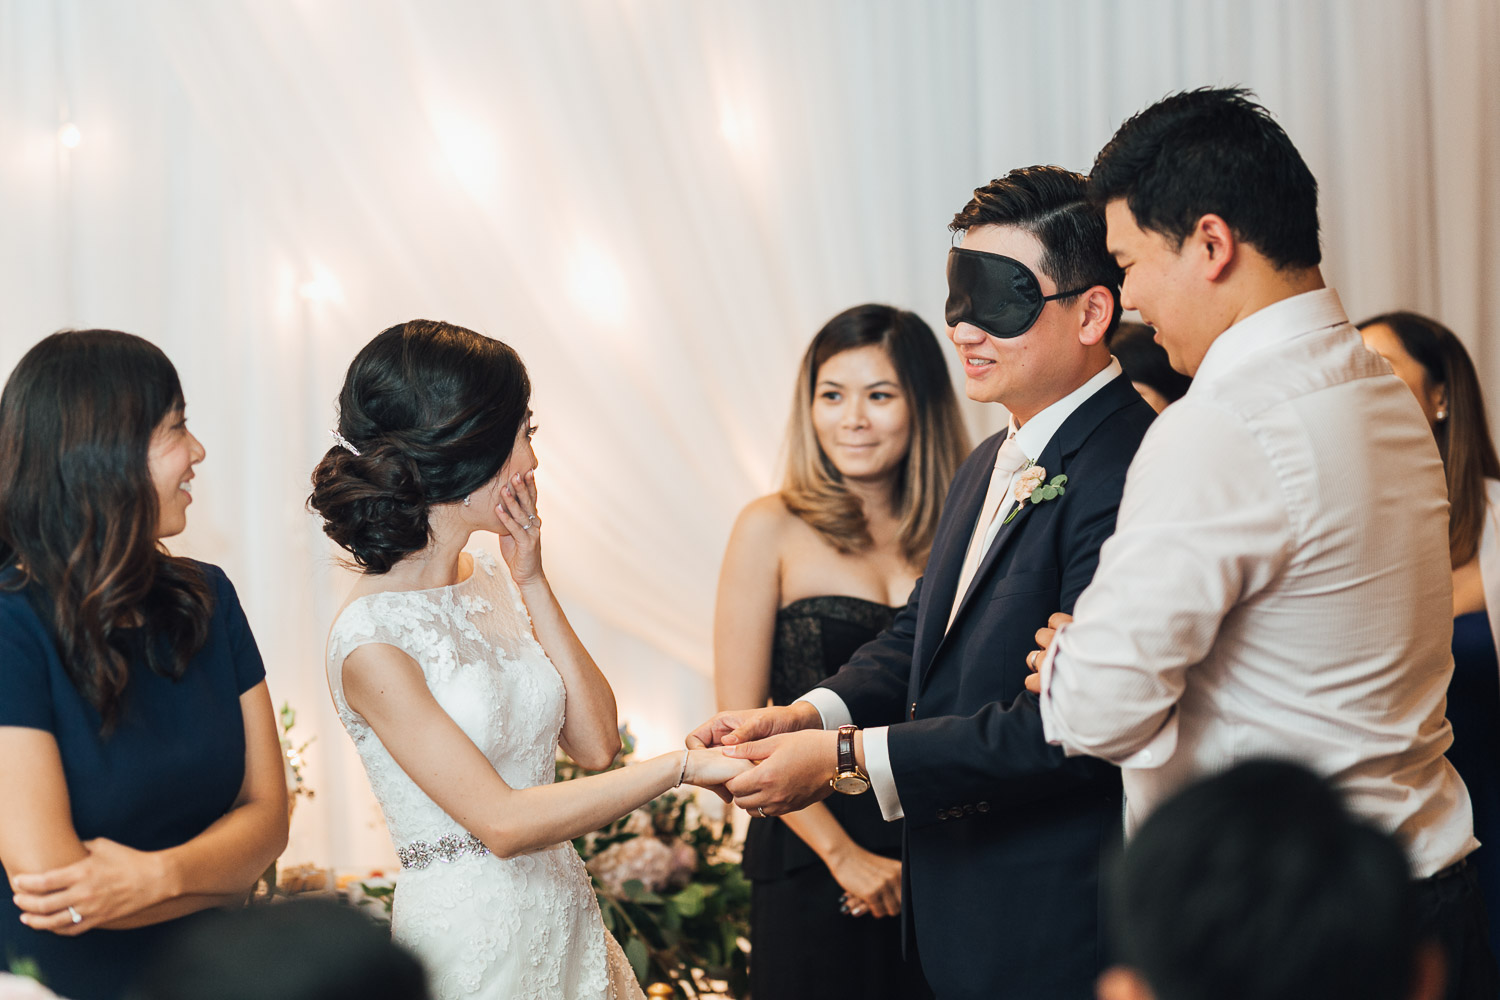 shaughnessy golf and country club wedding reception vancouver photographer